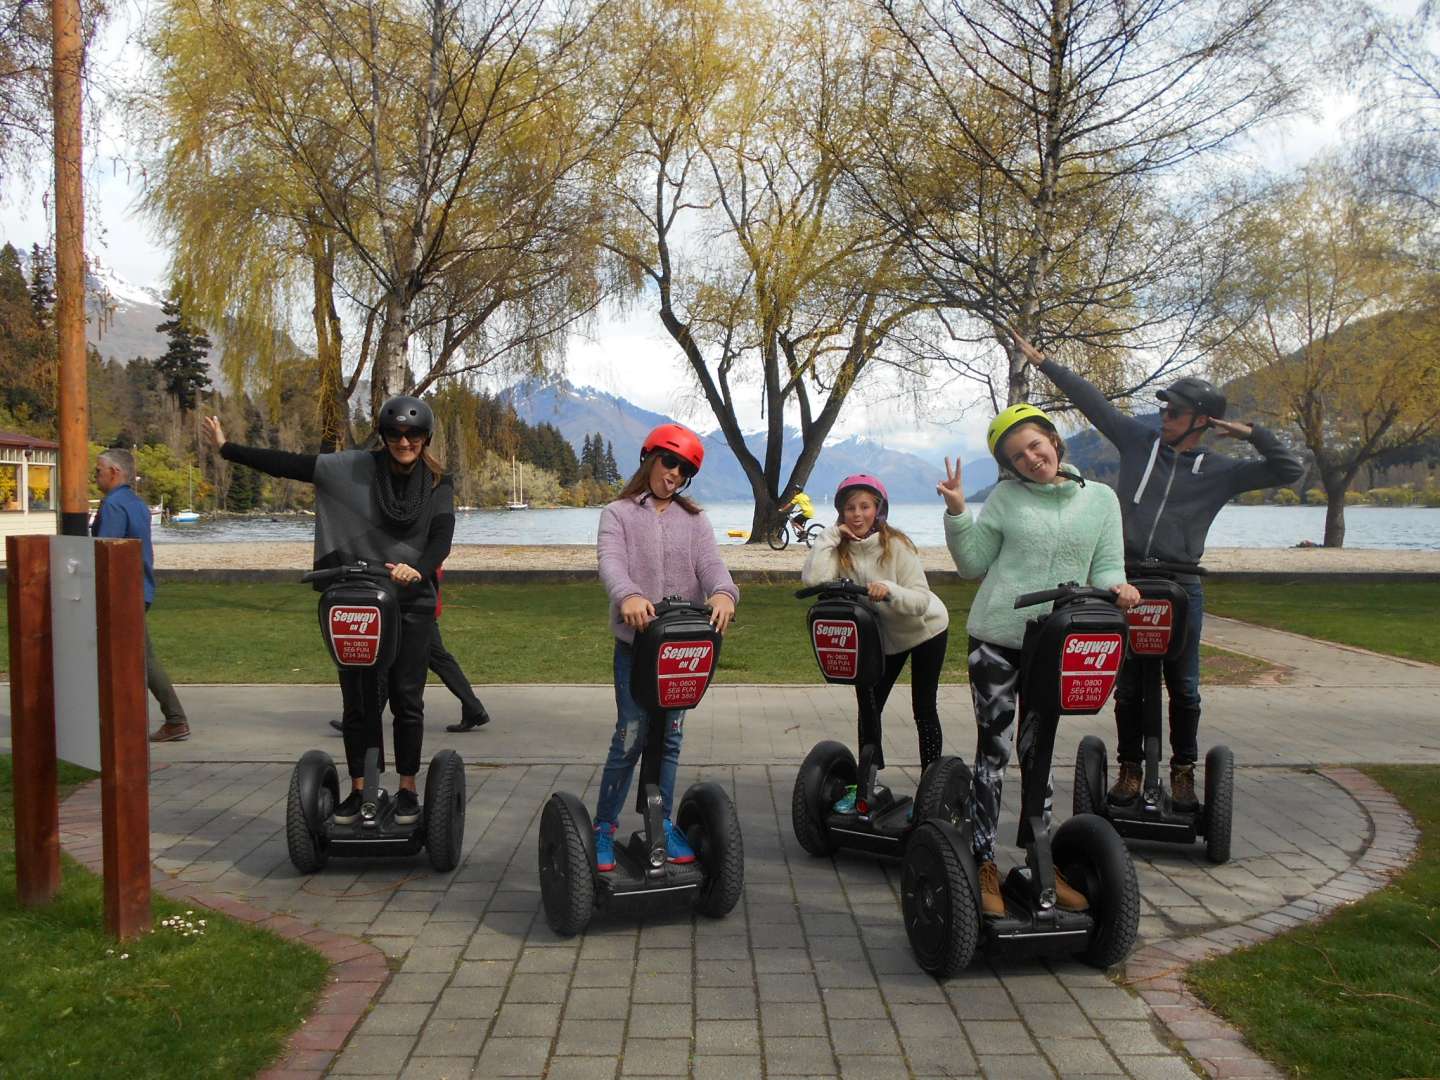 Segway Fun Activity for all the Family